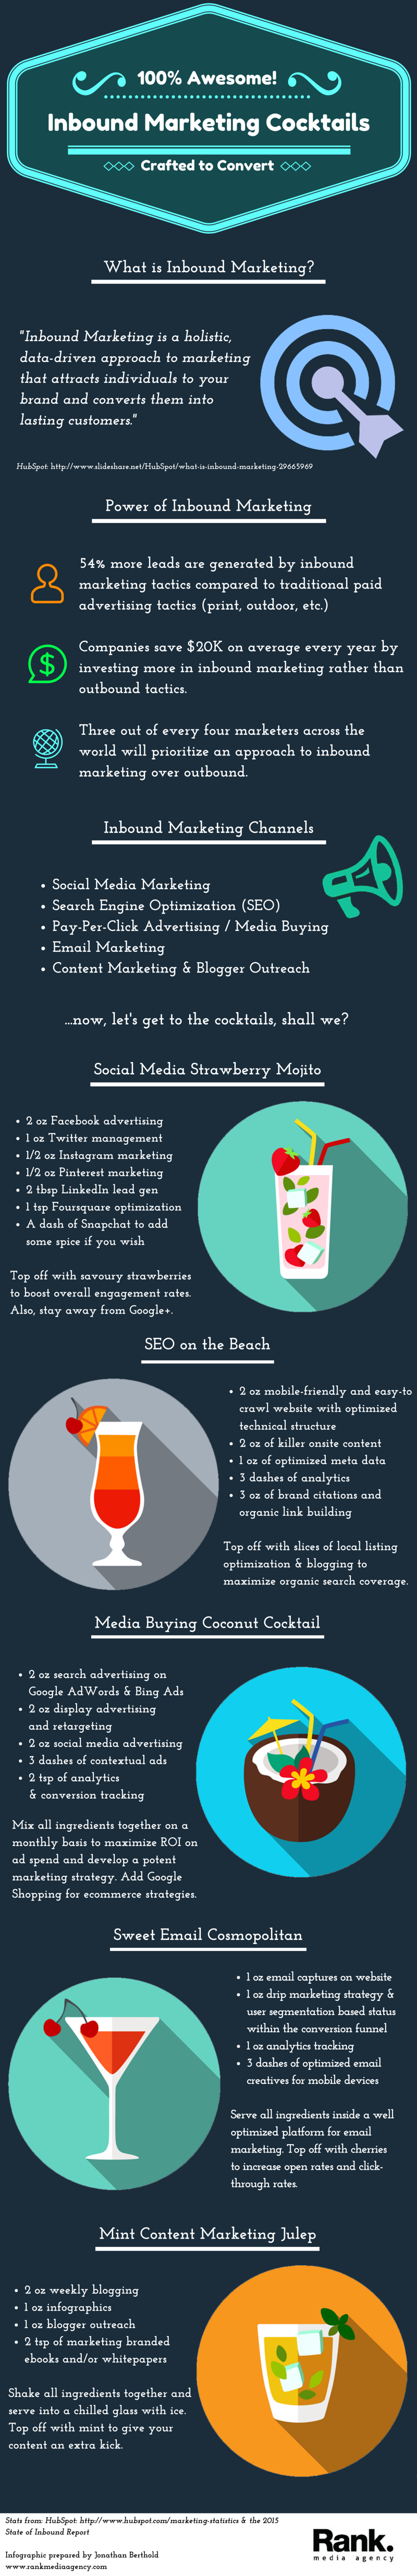 100% Awesome Inbound Marketing Cocktails Infographic